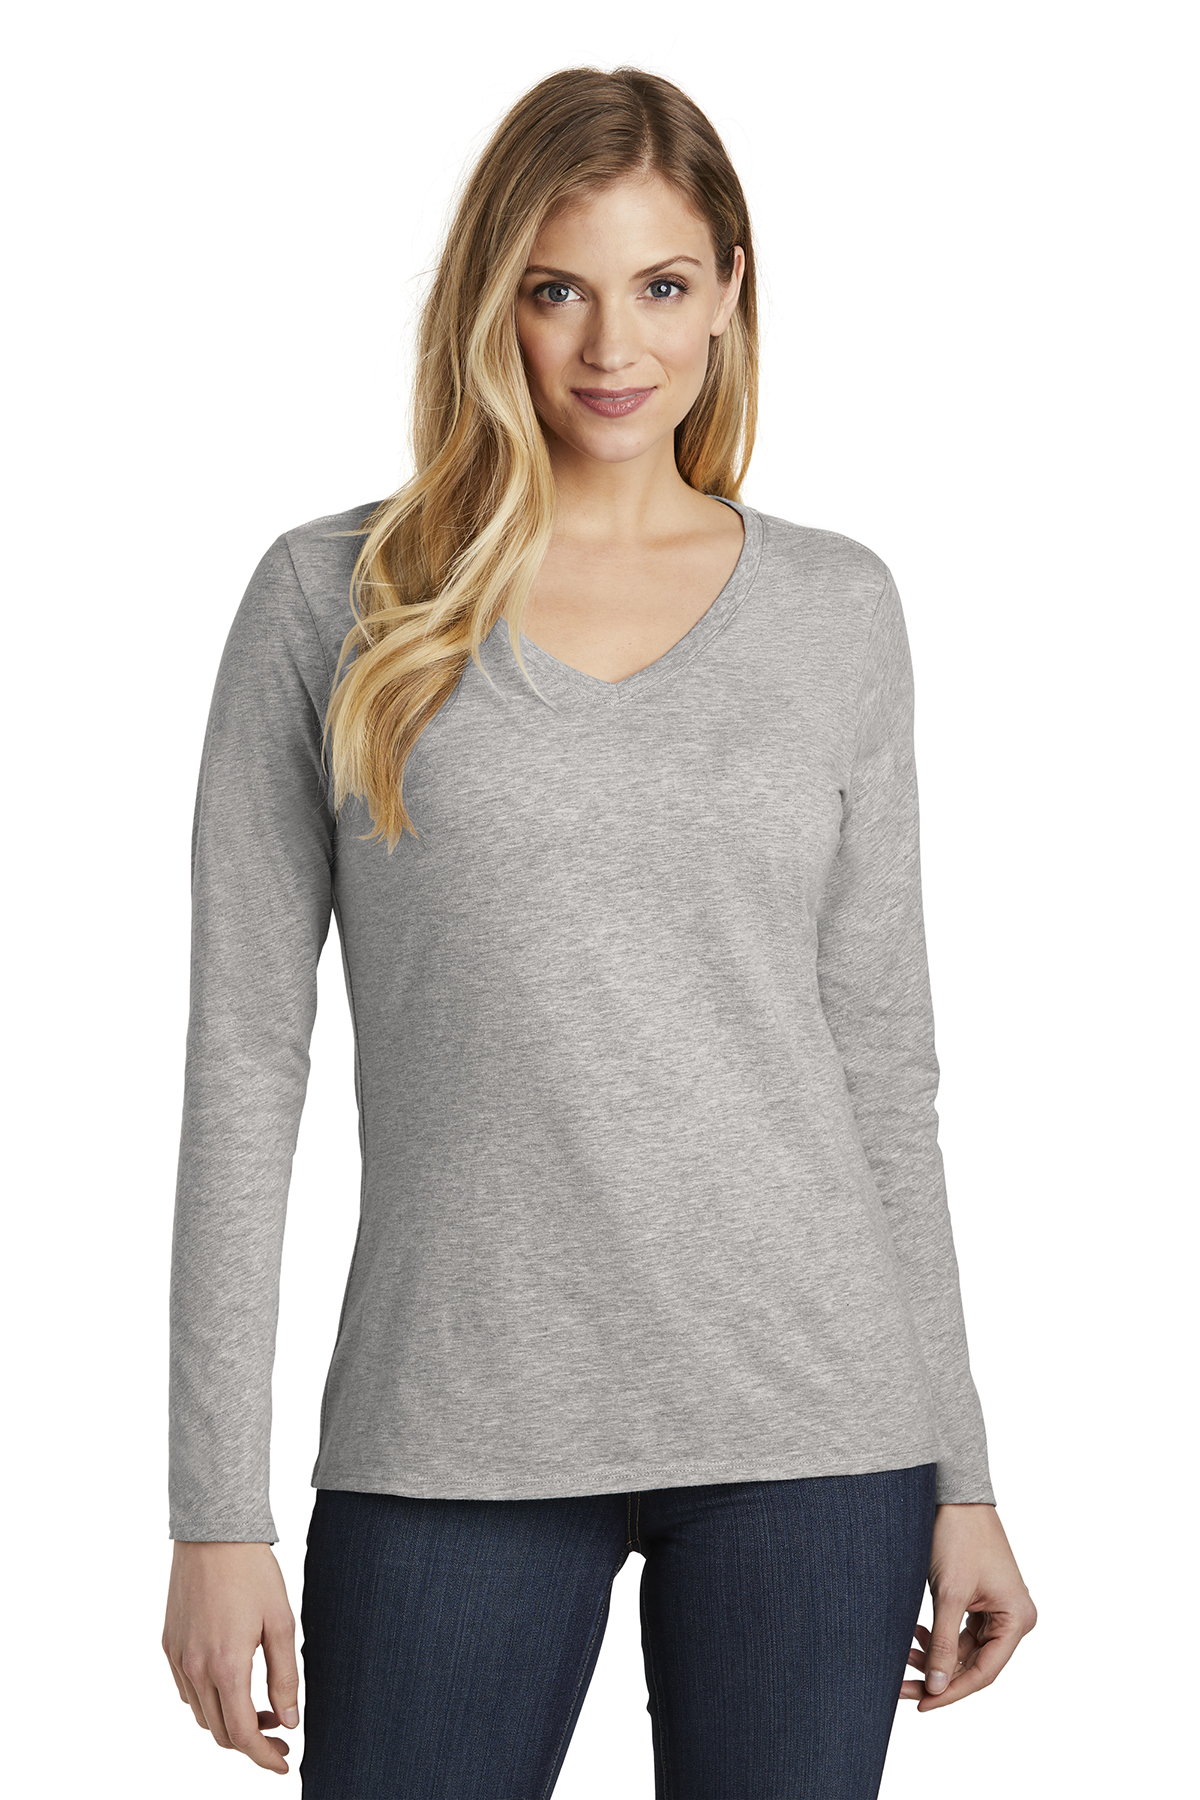 District Women’s Very Important Tee Long Sleeve V-Neck | Product | SanMar